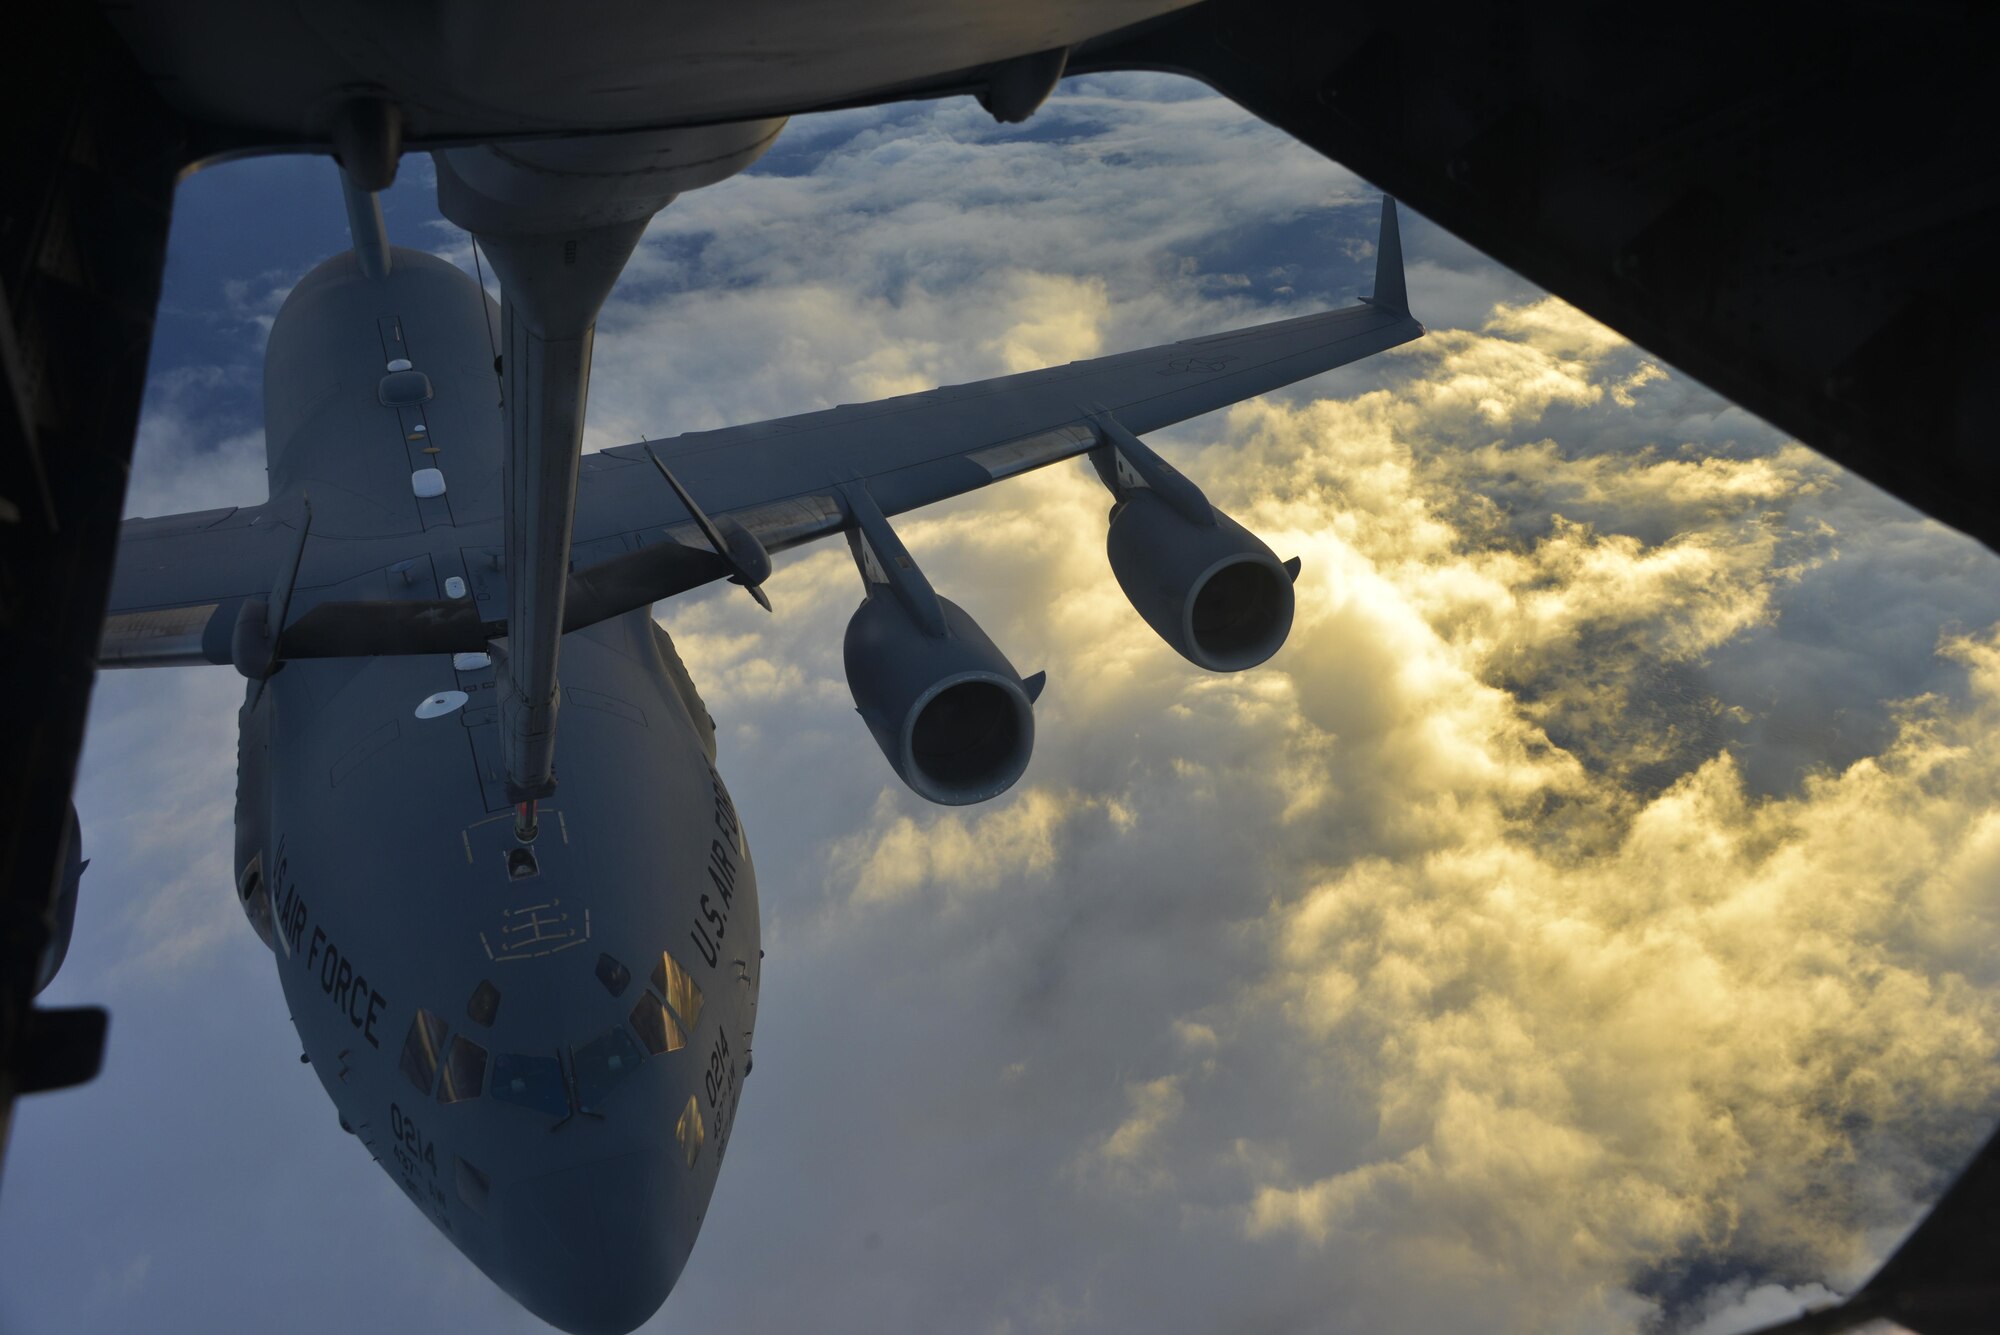 A KC-10 Extender from Travis Air Force Base, California, refuels a C-17 Globemaster III over the Pacific during Exercise Ultimate Reach July 13, 2017. During the operation, three KC-10s from Travis AFB and Joint Base McGuire-Dix-Lakehurst, New Jersey, refueled five C-17s carrying more than 300 coalition paratroopers. The C-17s went on to conduct a strategic air drop over Australia in support of Exercise Talisman Saber 2017. (U.S. Air Force photo by 2nd Lt. Sarah Johnson)